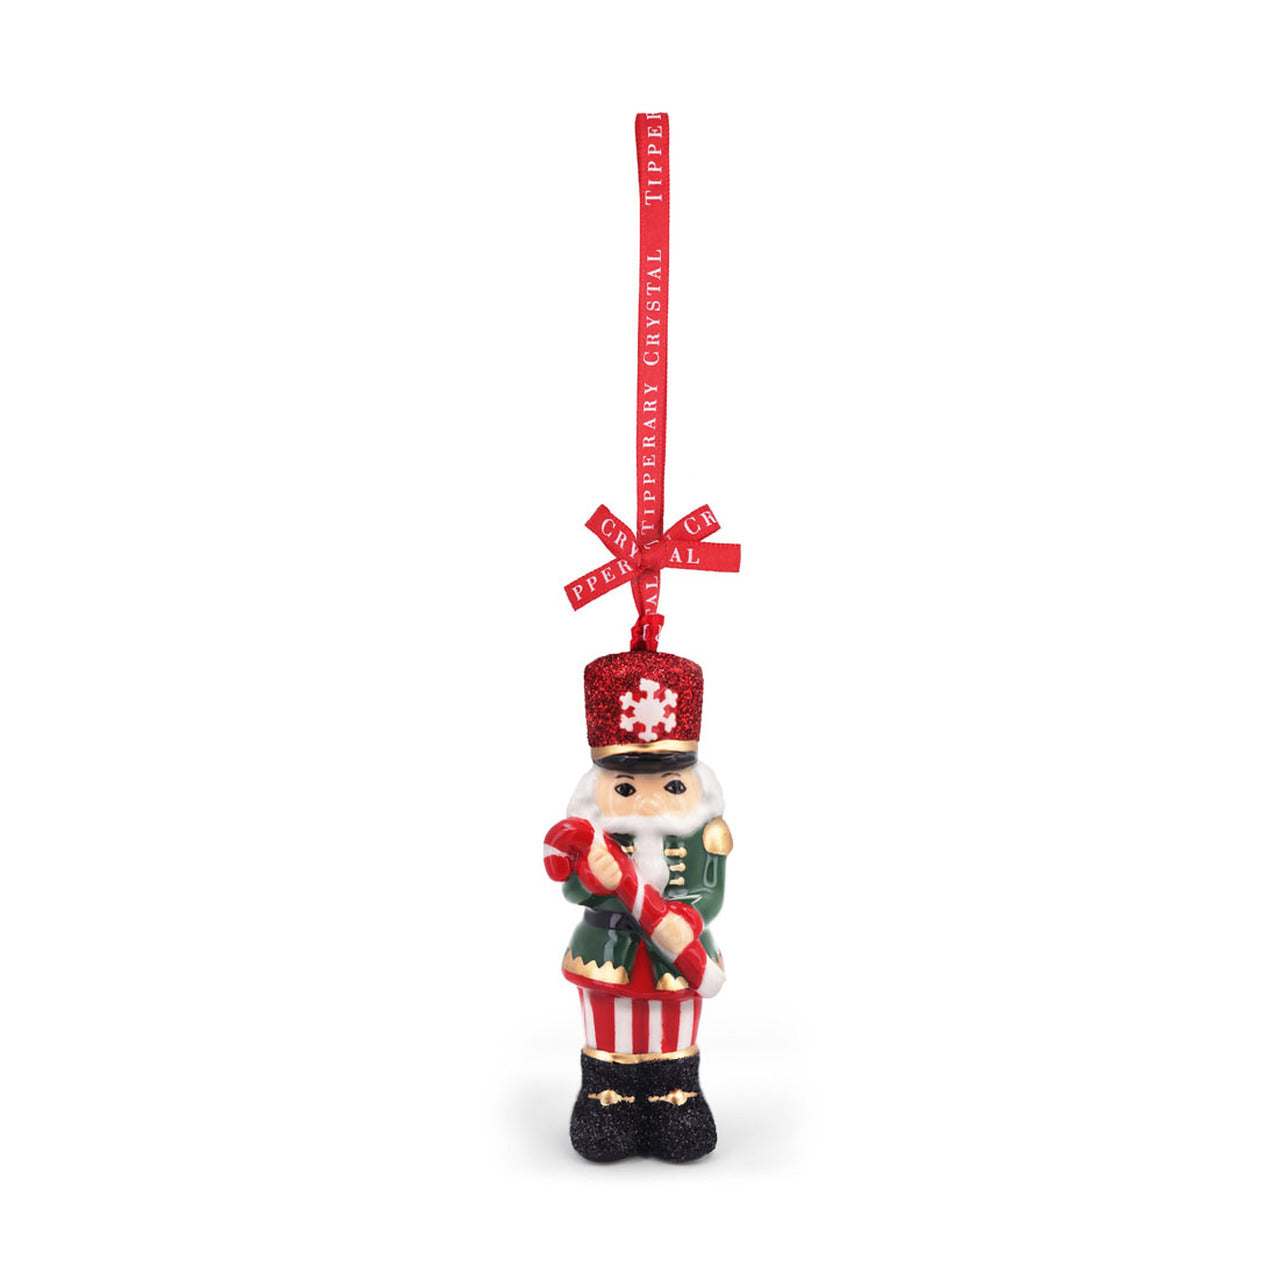 Tipperary Crystal Porcelain Nutcracker Christmas Decoration  We just Love Christmas! The festive season, the giving of gifts, creating memories and being together with family and loved ones. Have lots of fun with our lovingly designed and created Christmas decorations, each one has a magic sparkle of elf dust!